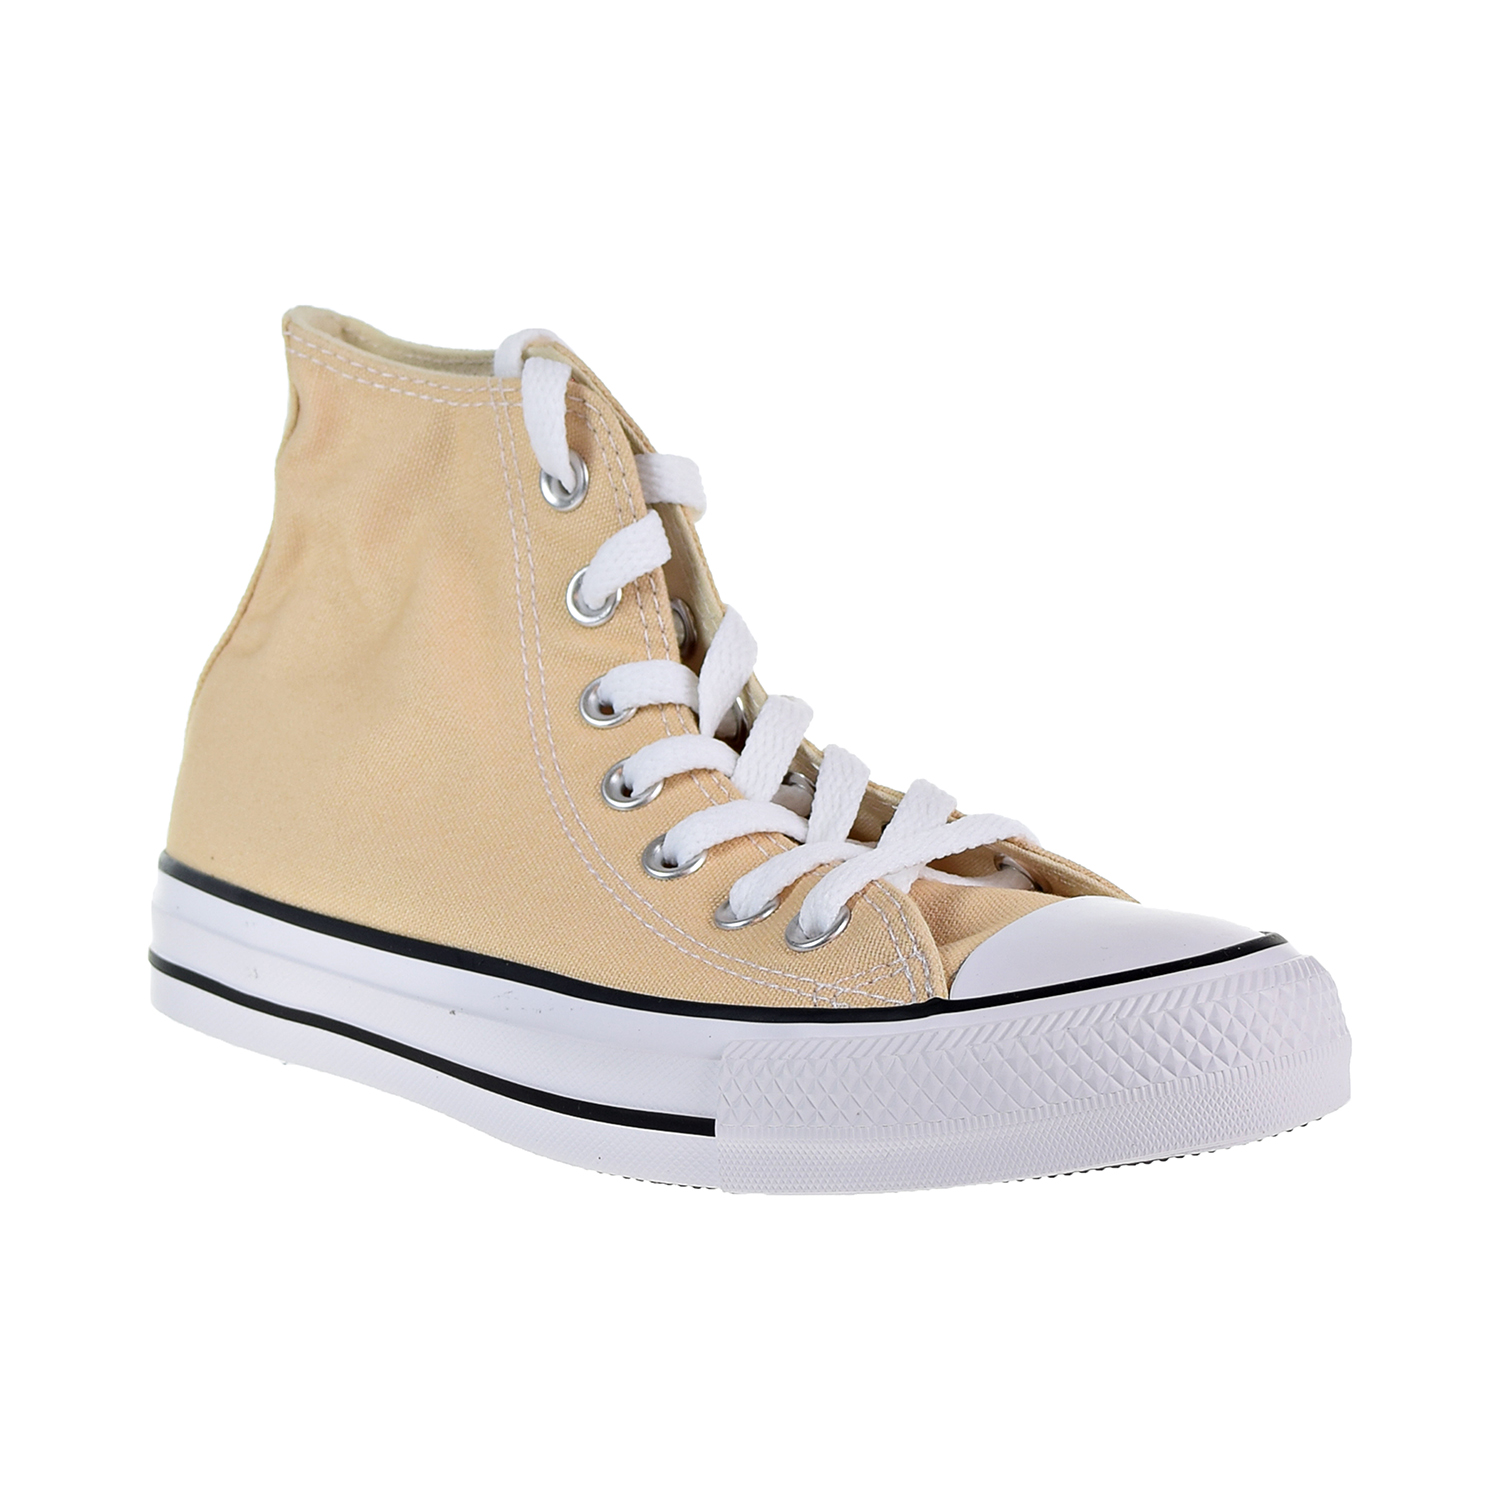 Converse Chuck Taylor All Star Hi Men's/Big Kids' Shoes Raw Ginger 160456f - image 2 of 6